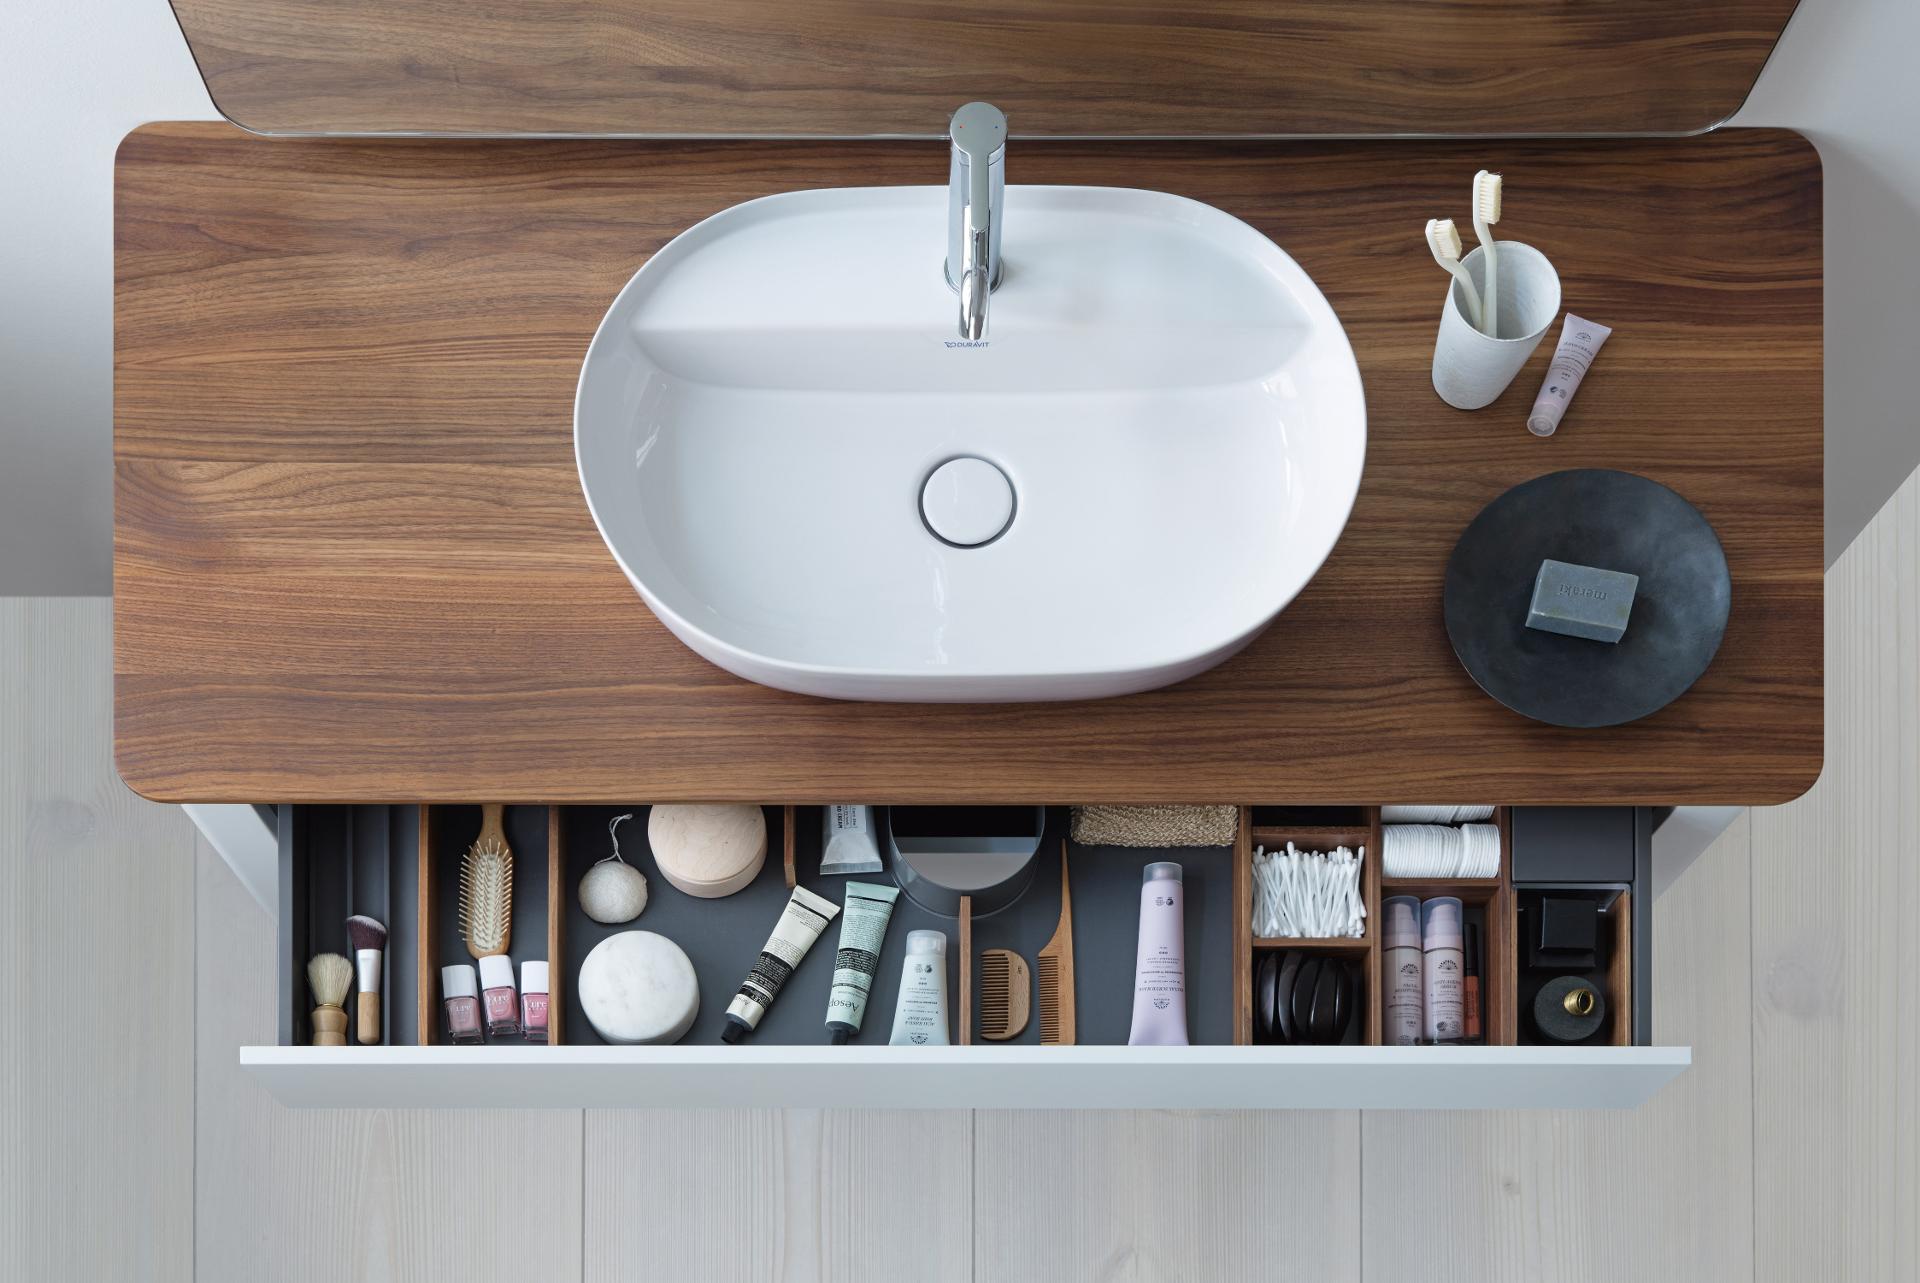 Luv washbowl with vanity base and interior system
